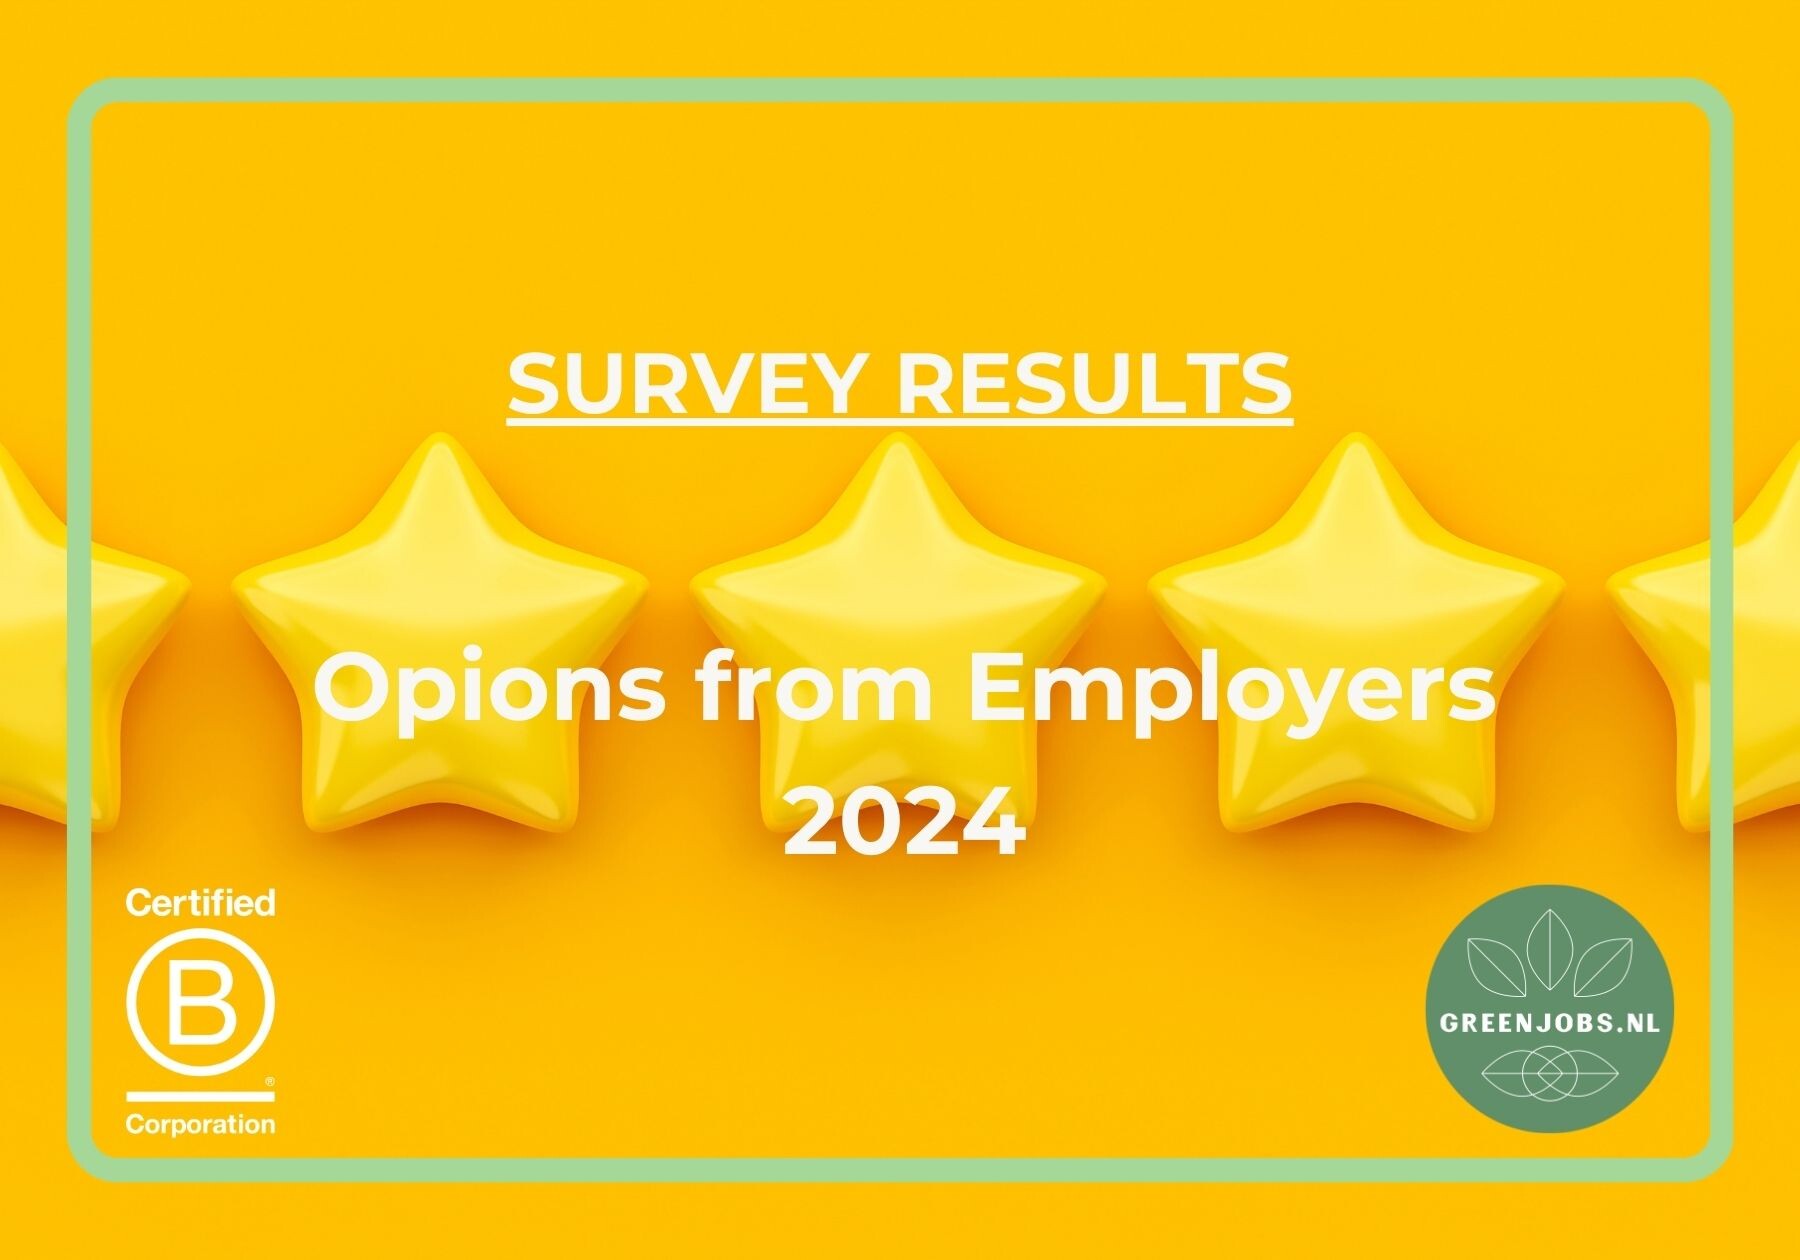 Survey Results - Employers' Opinions about Greenjobs.nl